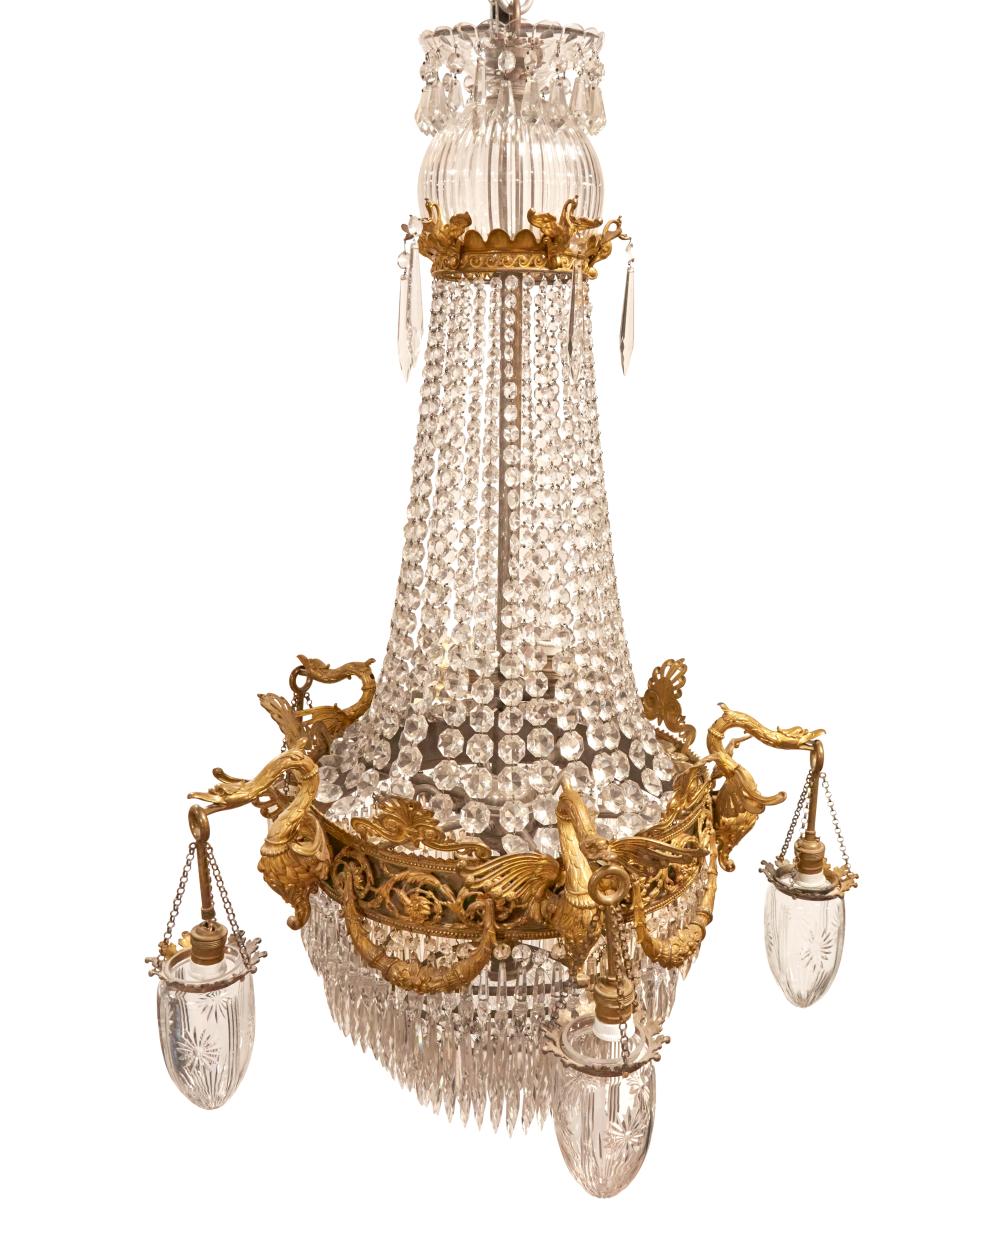 A FRENCH EMPIRE STYLE DRAPED CHANDELIERA 3434b3